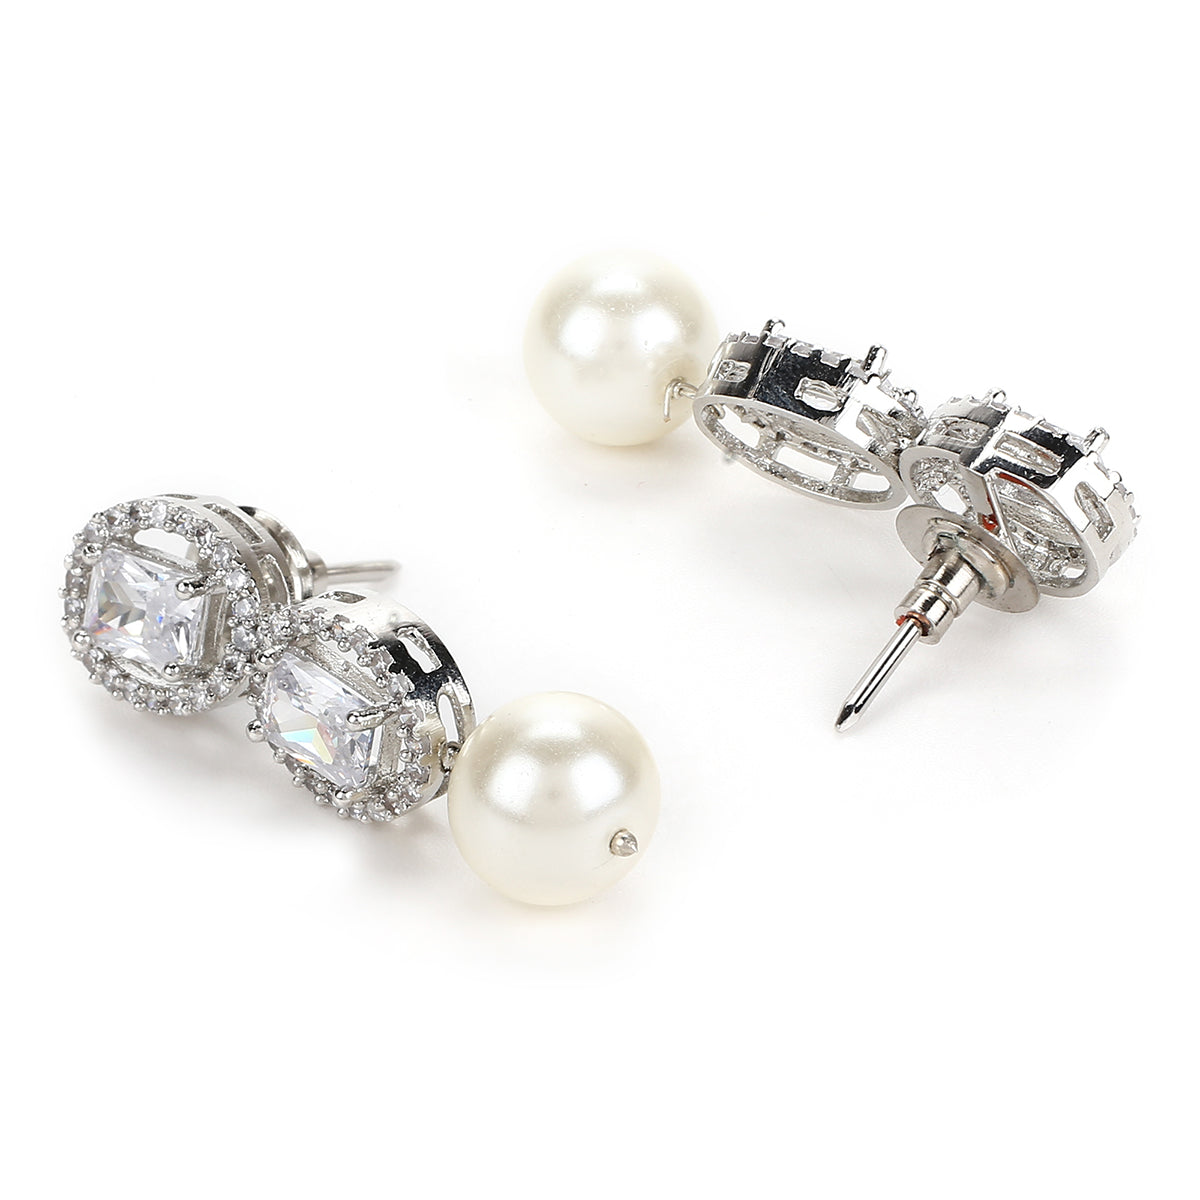 Silver Tone Handcrafted Earrings with Pearls